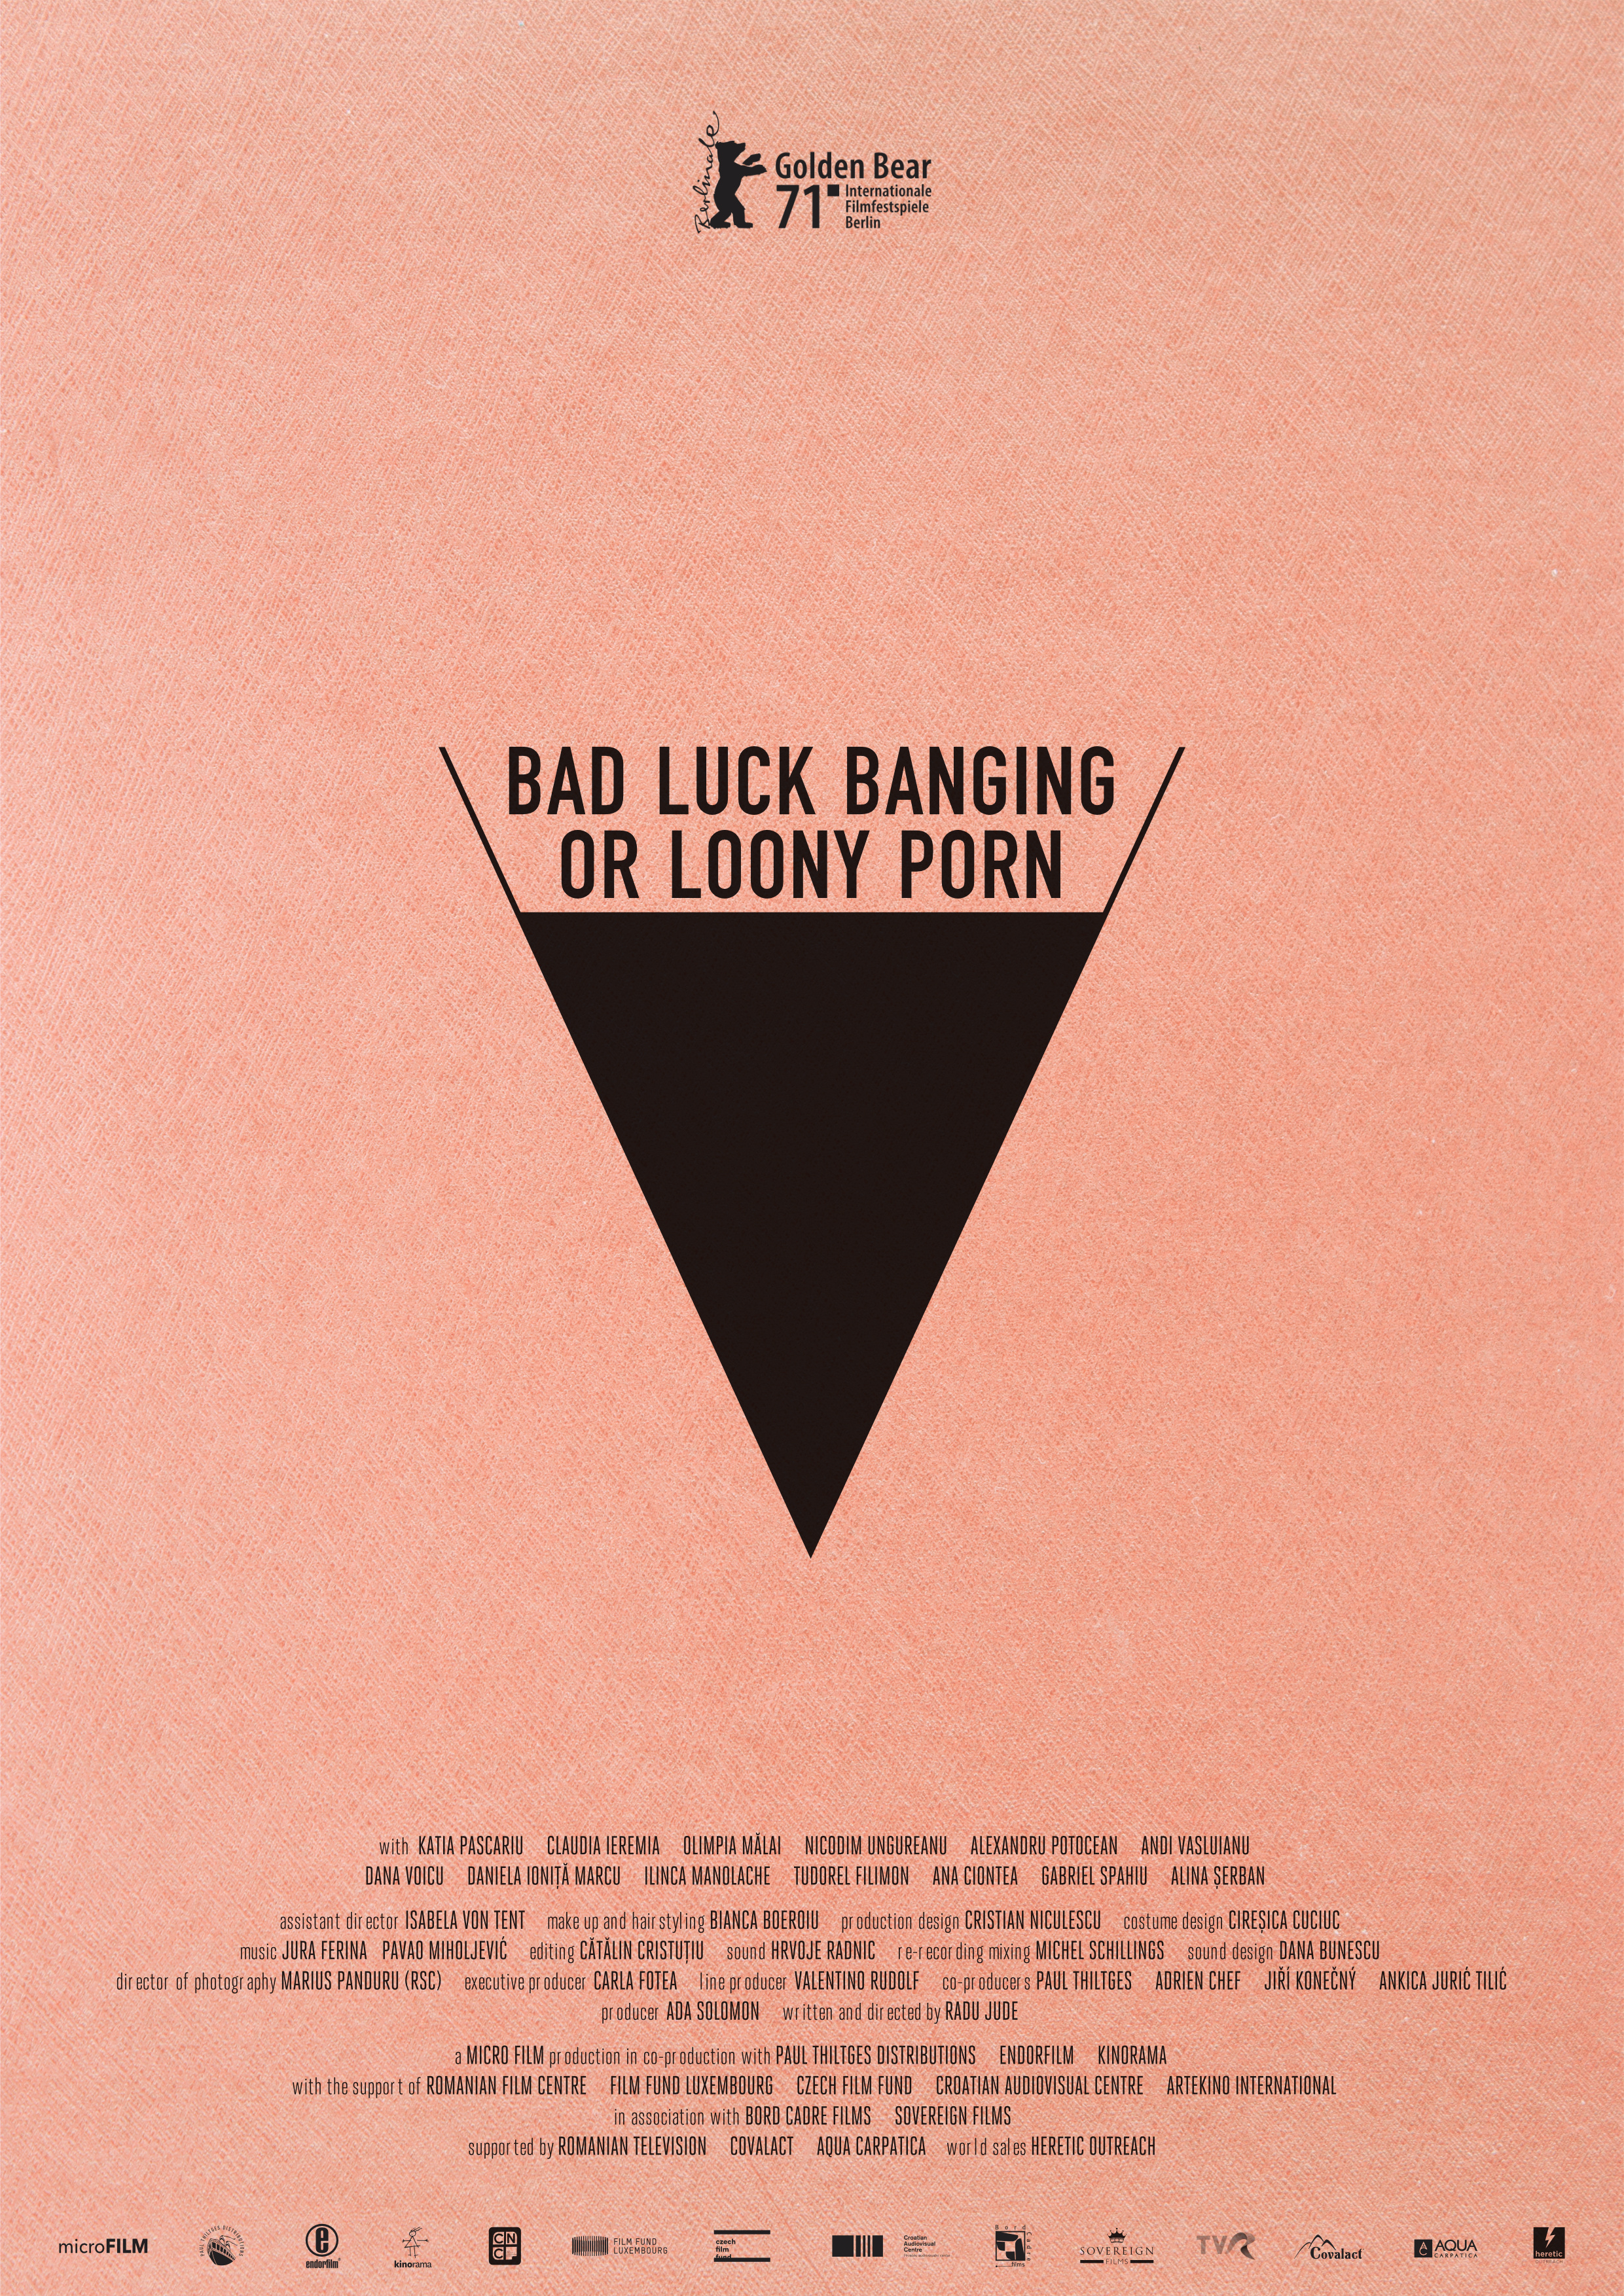 Bad Luck Banging or Loony Porn…